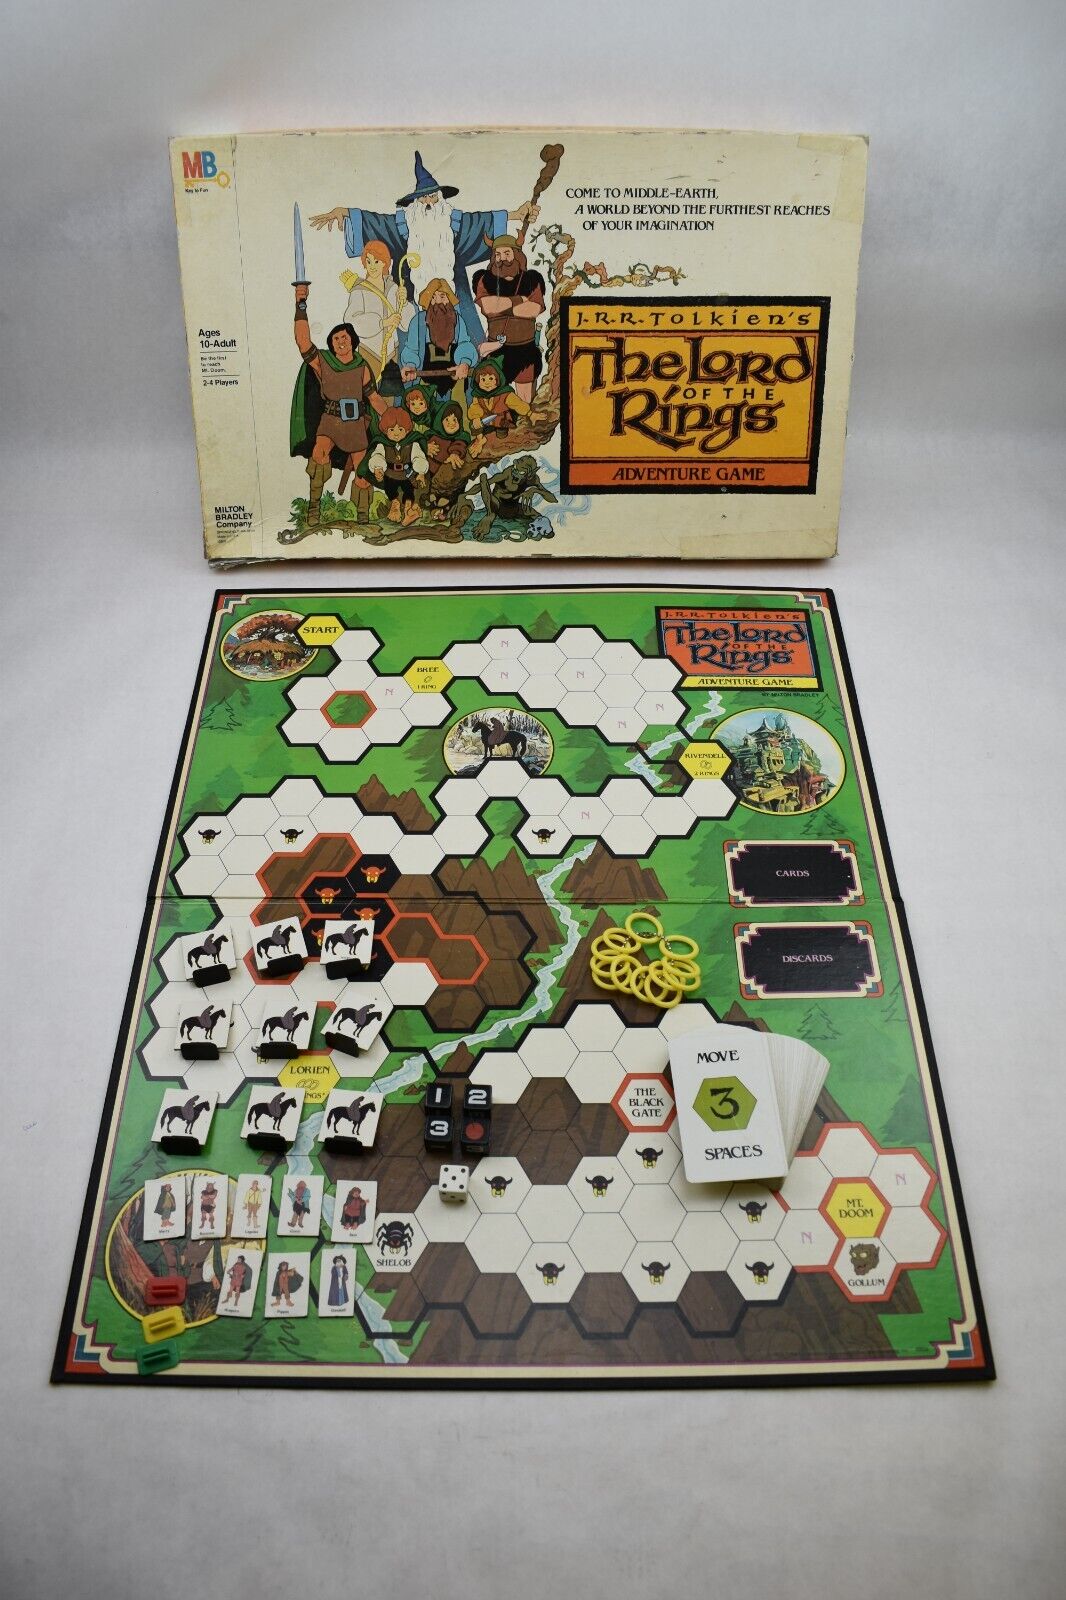 Vintage 1979 J.R.R. Tolkien’s The Lord of the Rings Adventure Board Game